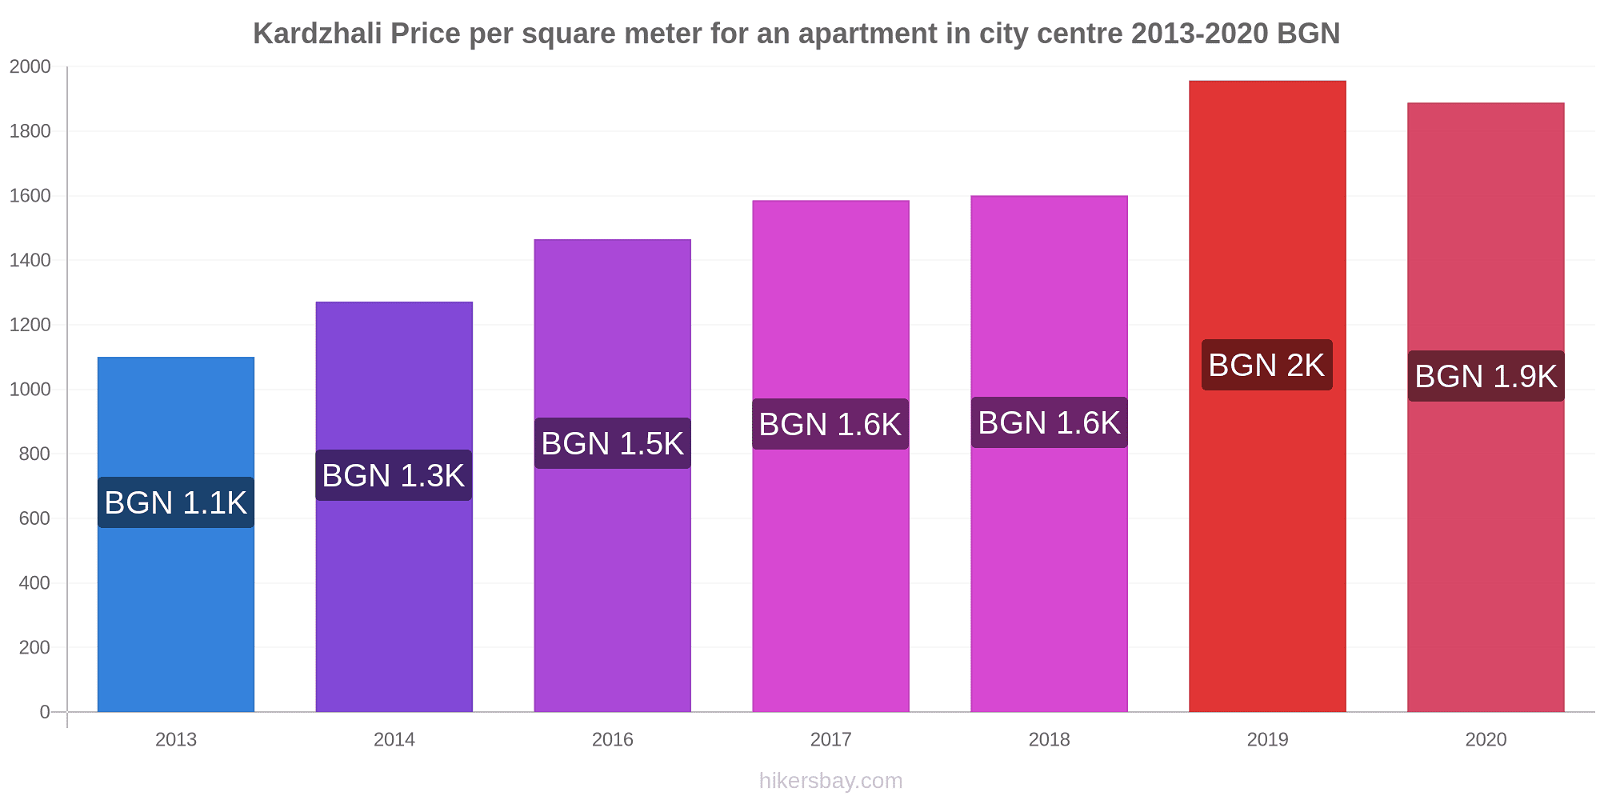 Kardzhali price changes Price per square meter for an apartment in city centre hikersbay.com